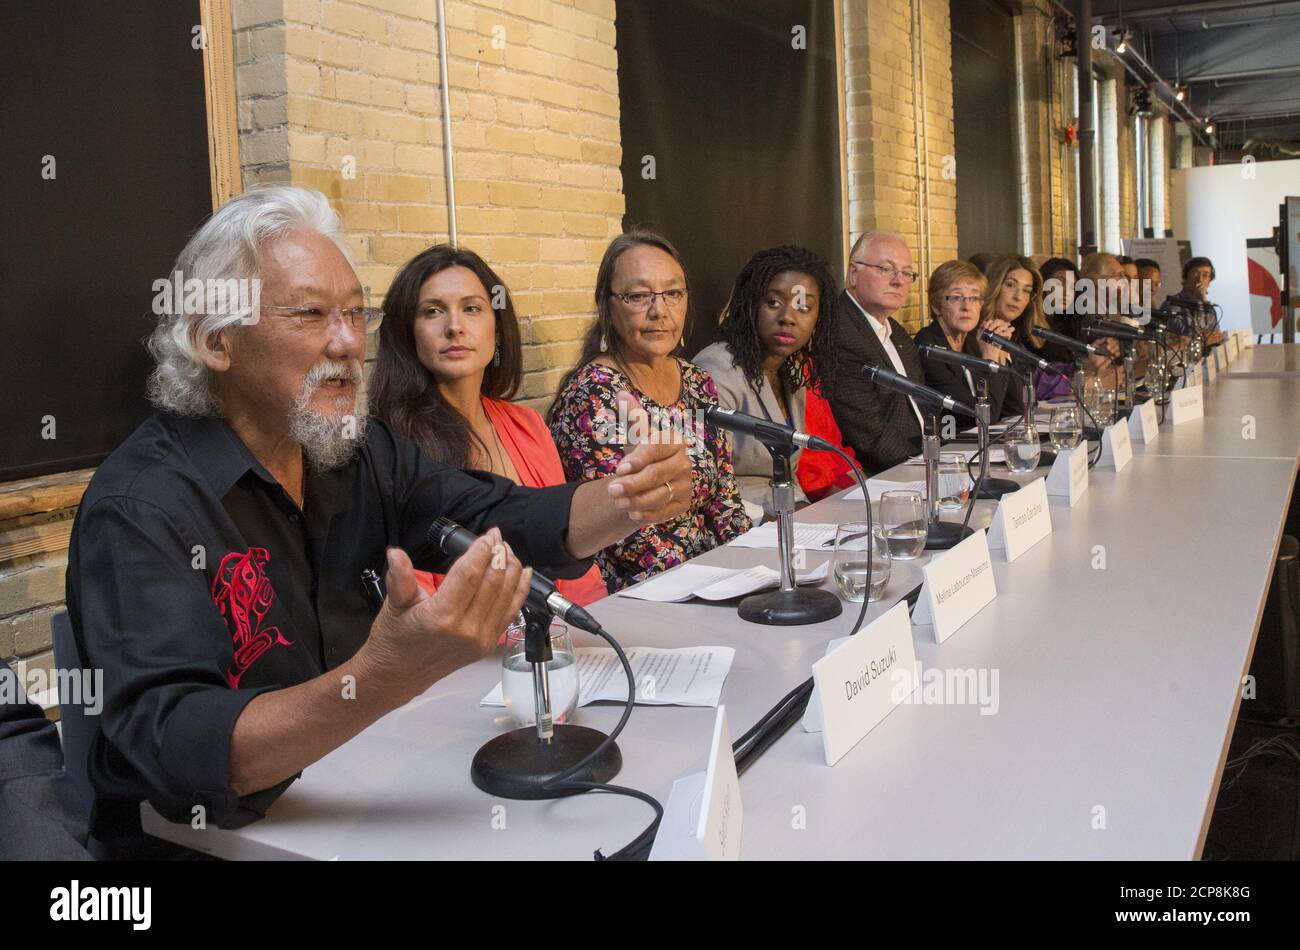 Environmental activist David Suzuki (L) speaks during news conference to launch the 'Leap Manifesto: A Call for a Canada Based on Caring for the Earth and One Another ' in Toronto, September 15, 2015. The Leap Manifesto is a group consisting of activists, artists, and celebrities that call for strong environmental policy changes and initiatives.  REUTERS/Mark Blinch Stock Photo